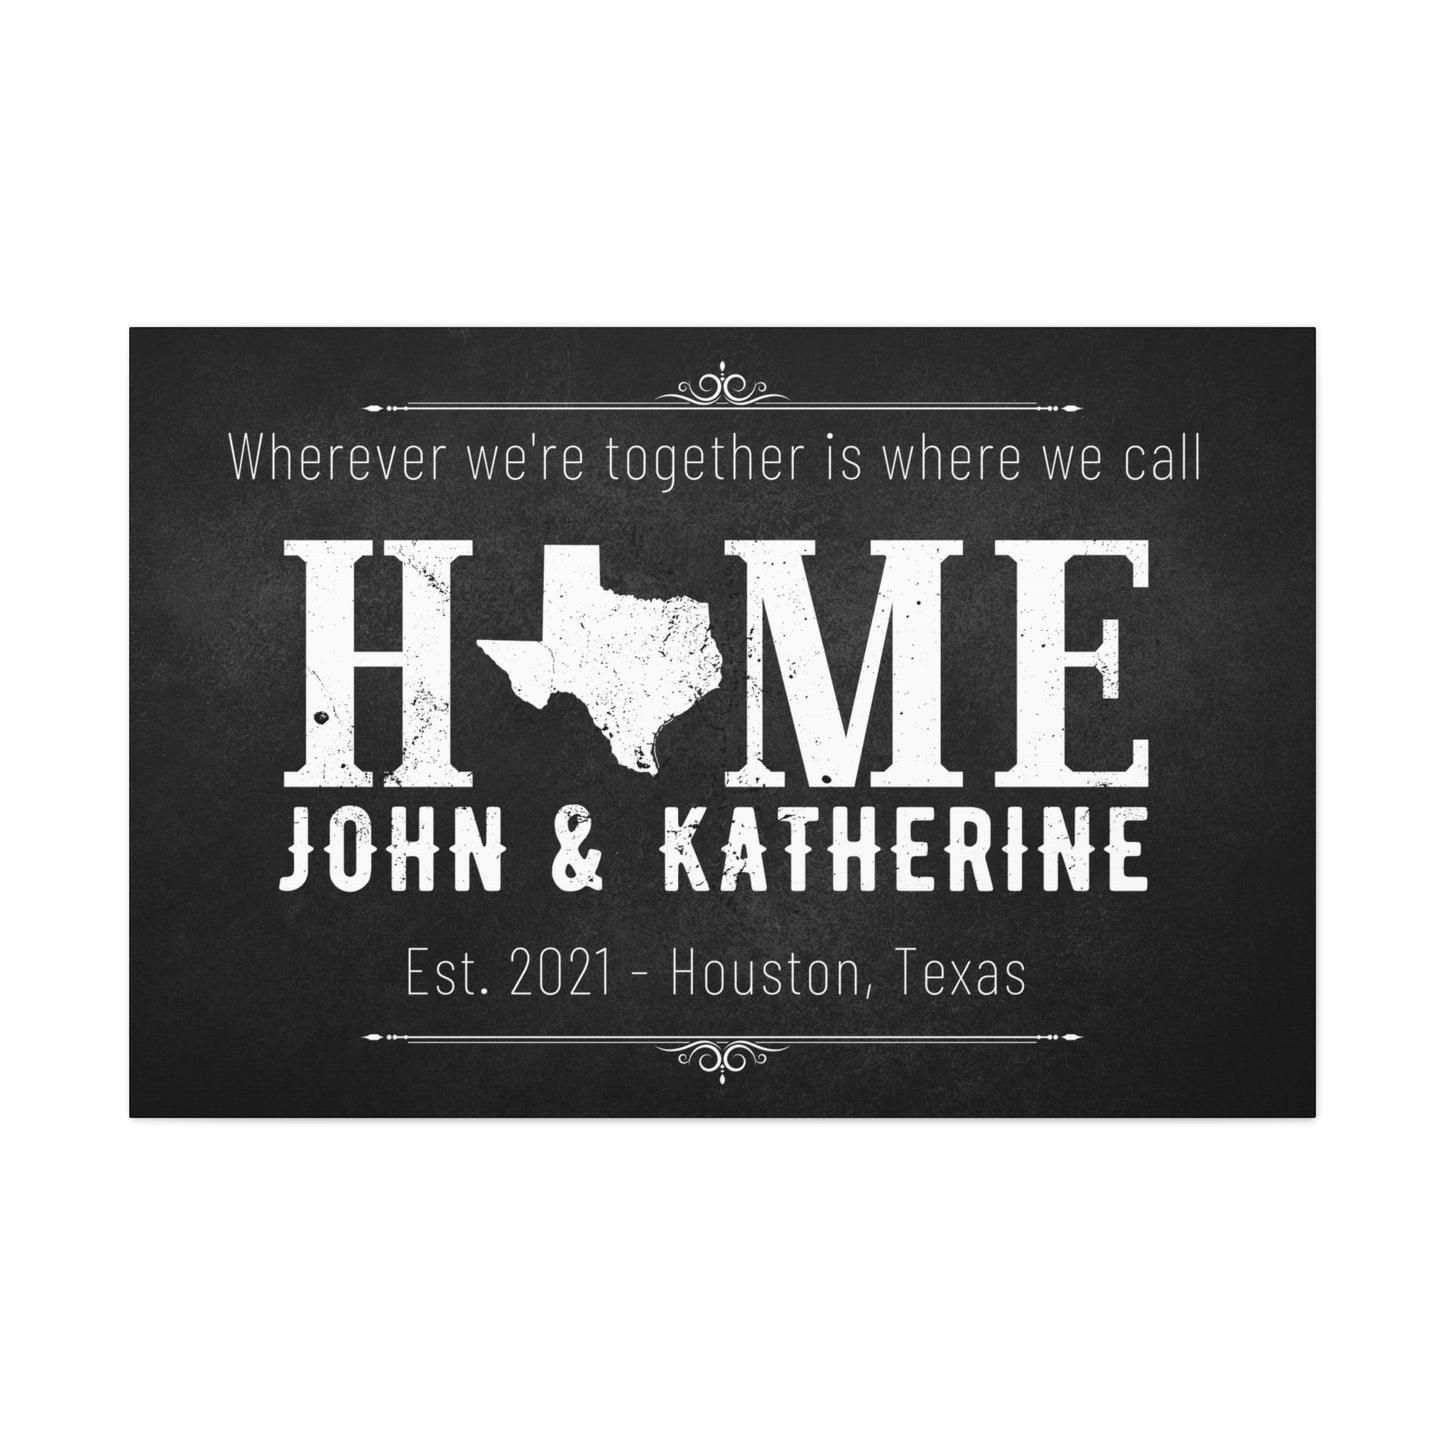 Wherever We Are Together Personalize Canvas Wall Art | Wedding Anniversary Engagement Love Gift